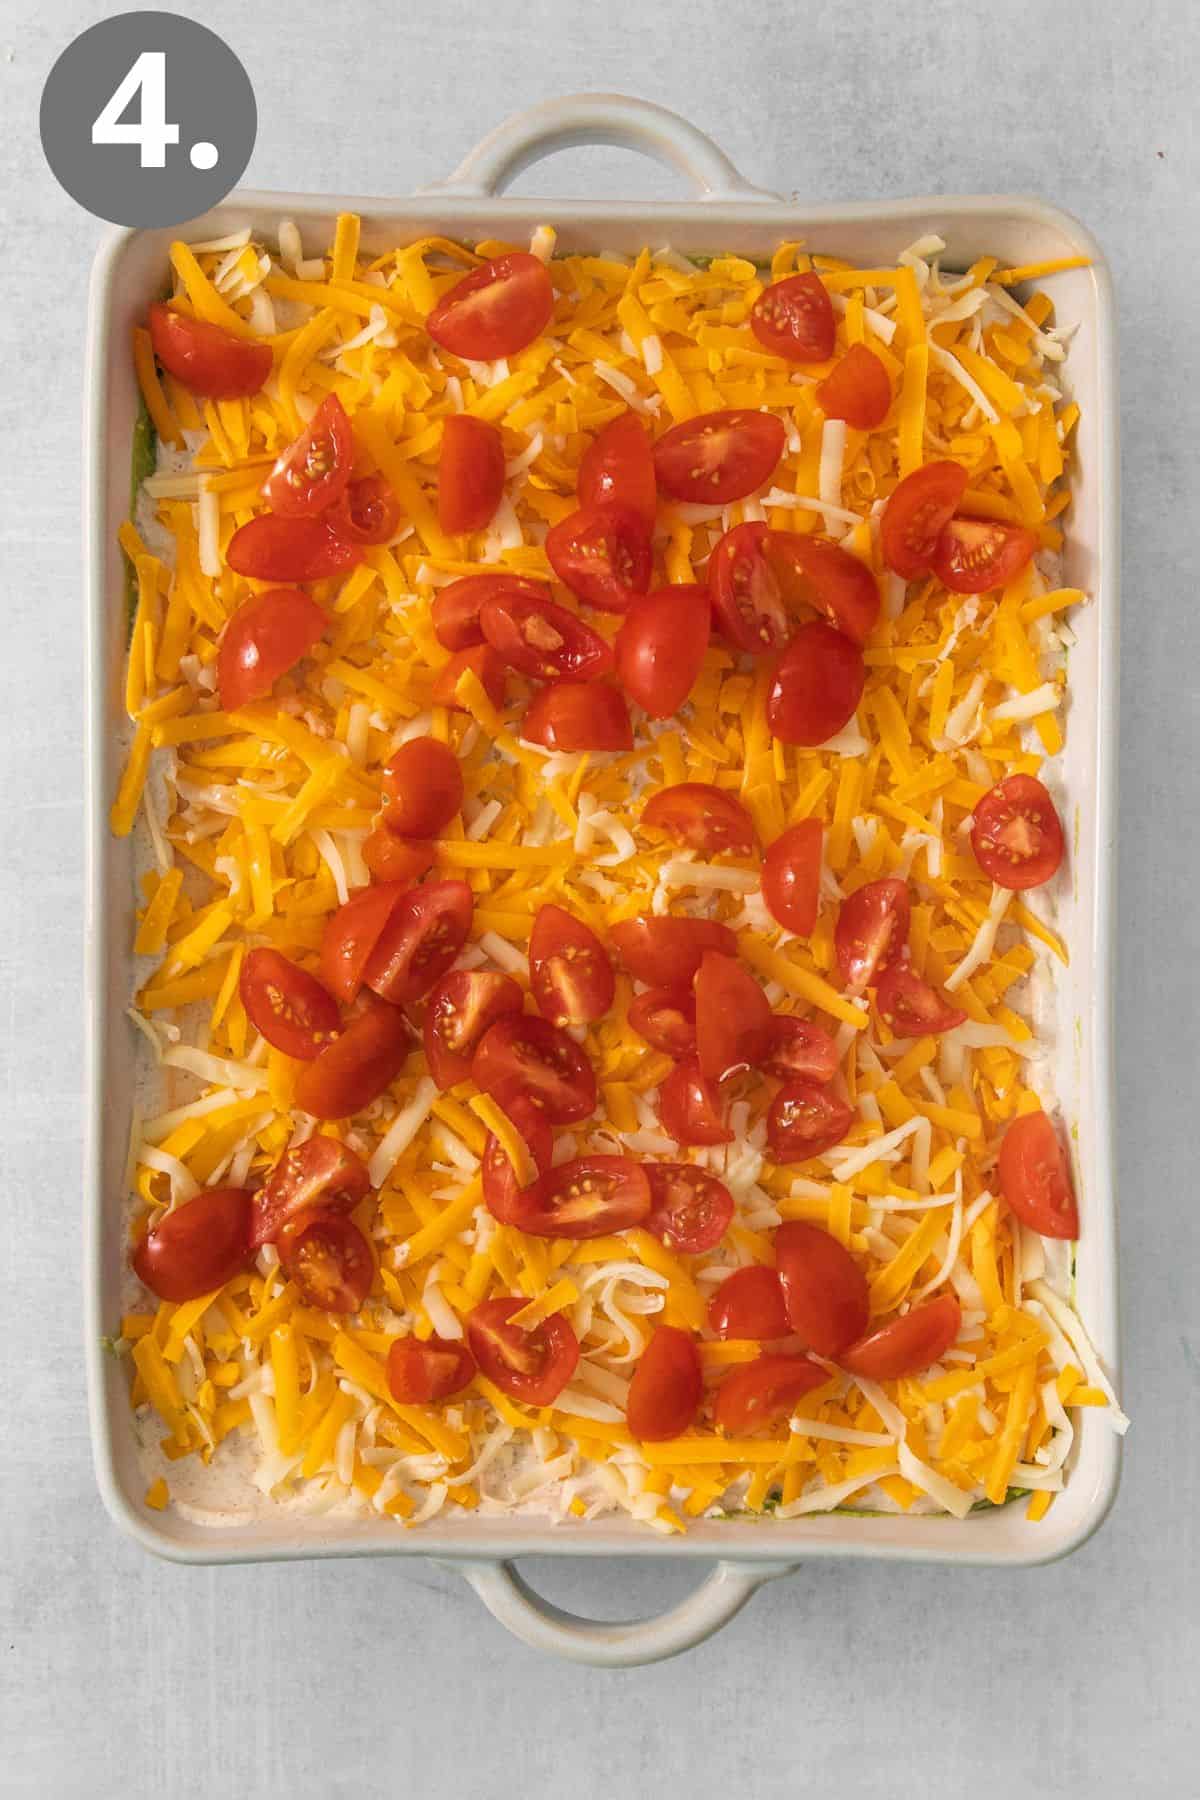 Tomatoes and cheese layered on top of the dip